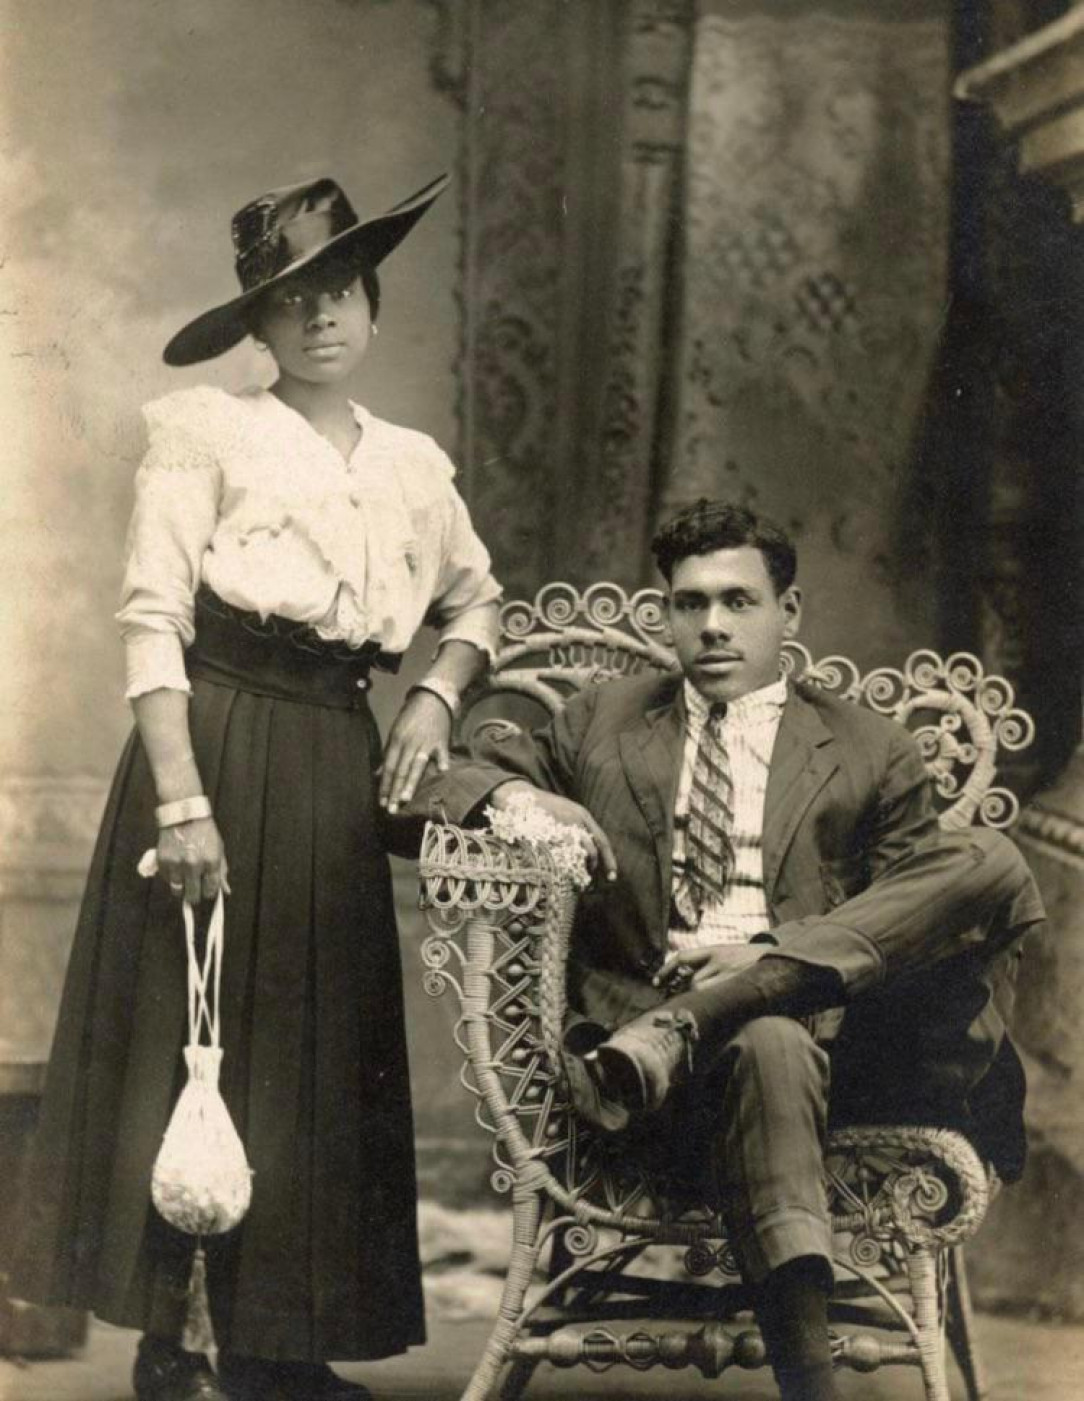 Couple in Harrisburg, PA, 1910s